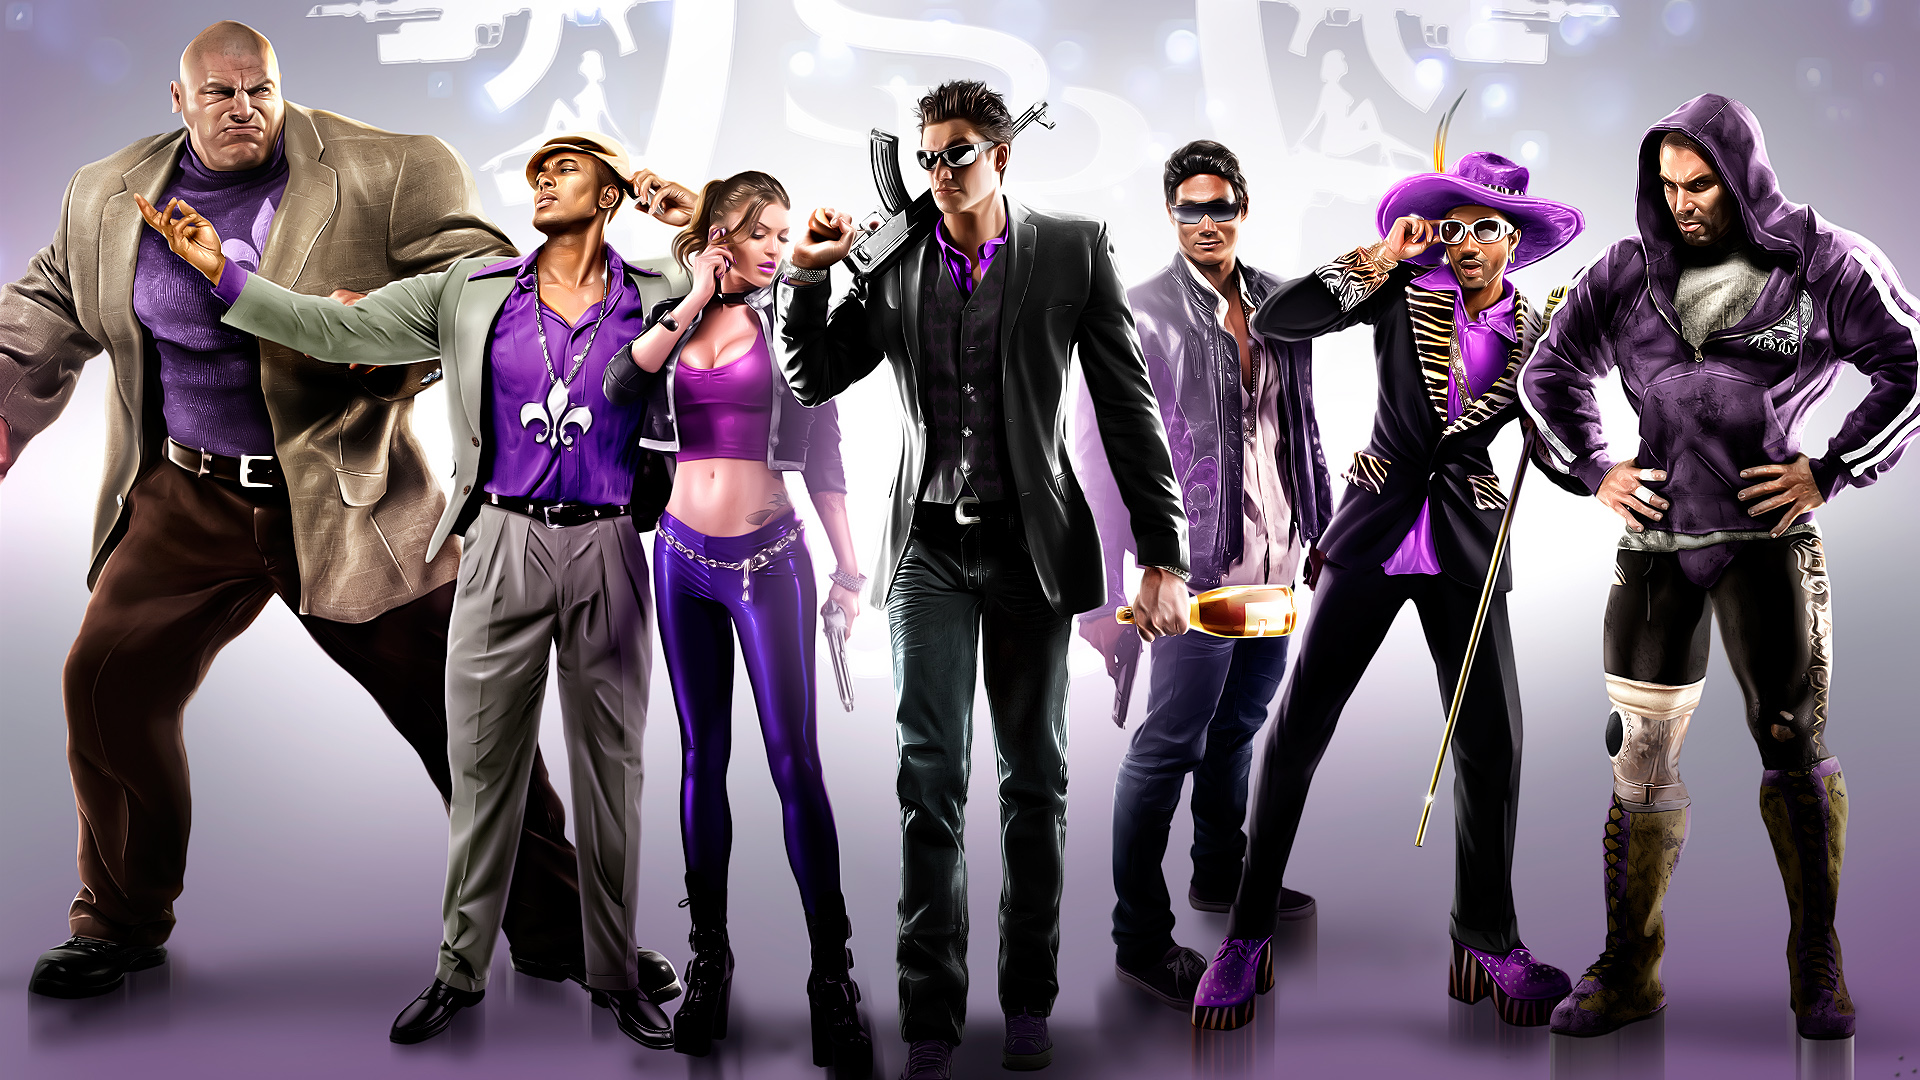 Surreal cityscape featuring characters from Saints Row: The Third, an action-packed video game.